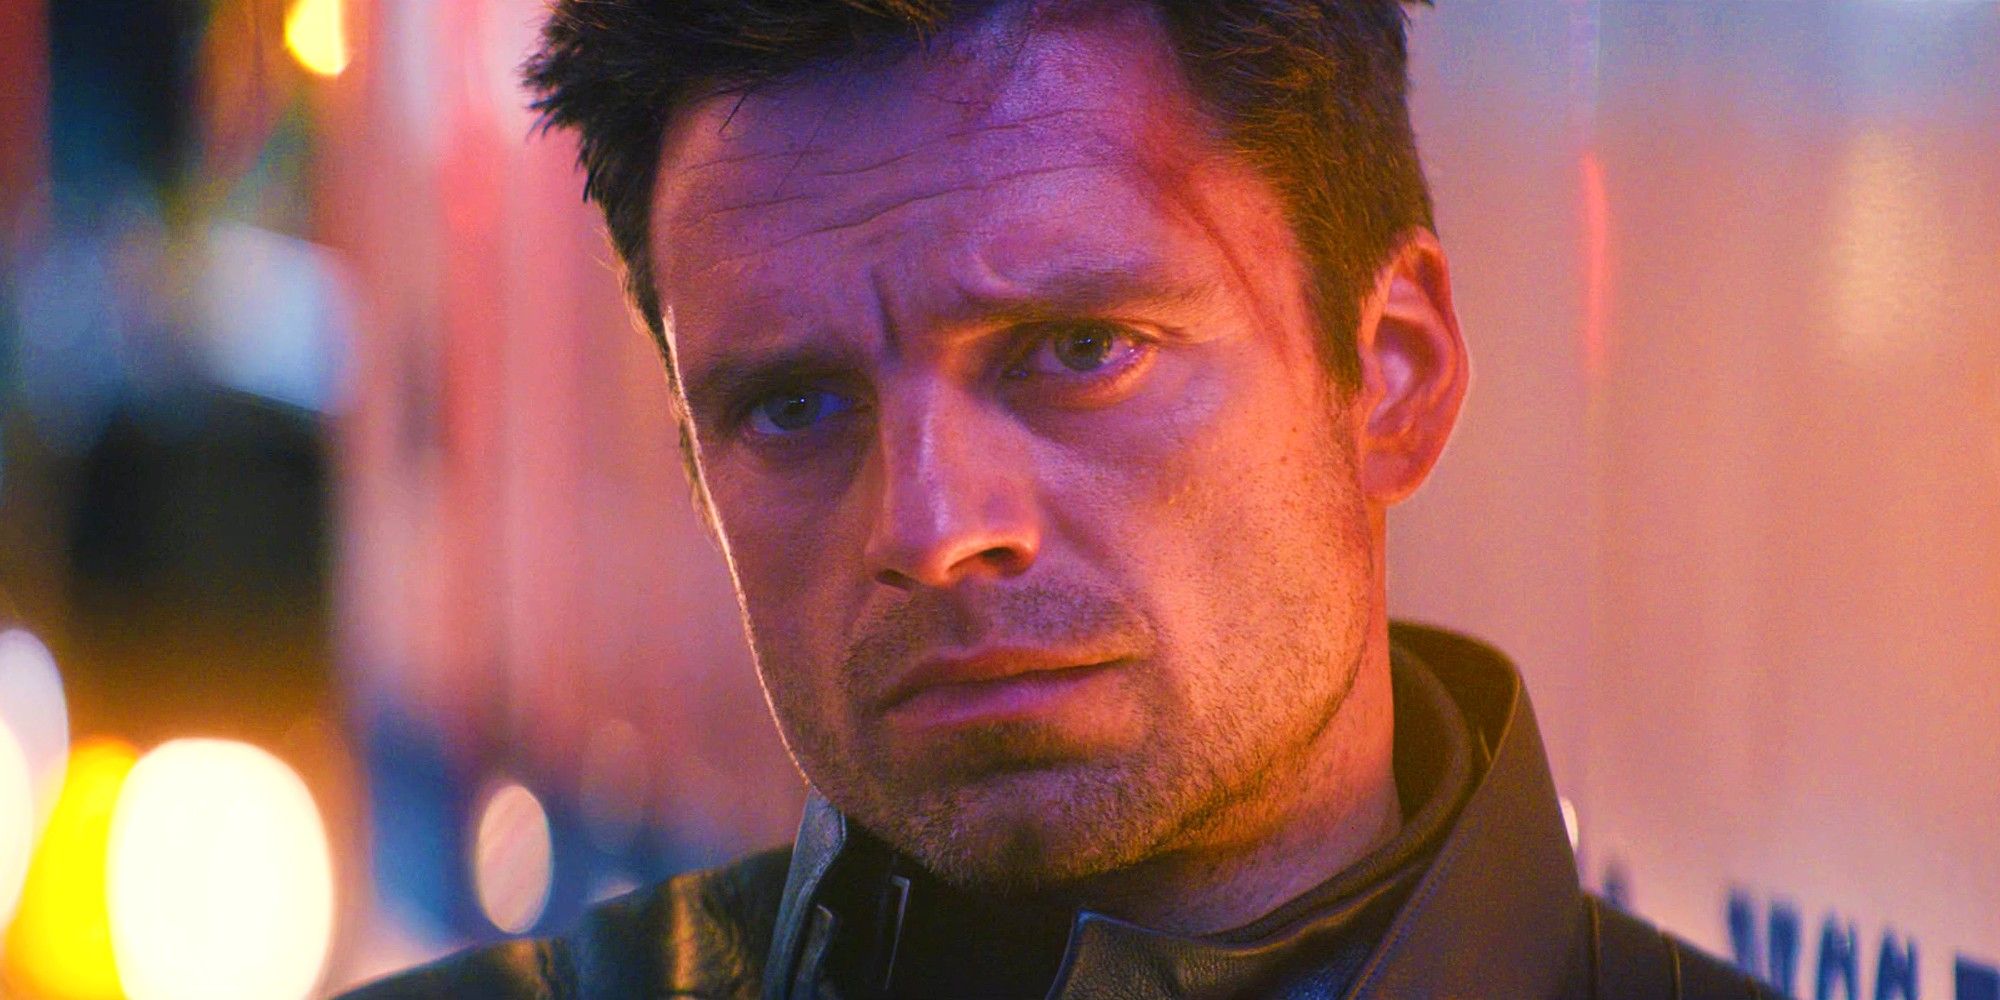 Sebastian Stan as Bucky Barnes Leaning Against An Ambulance In The Falcon and the Winter Soldier Episode 6